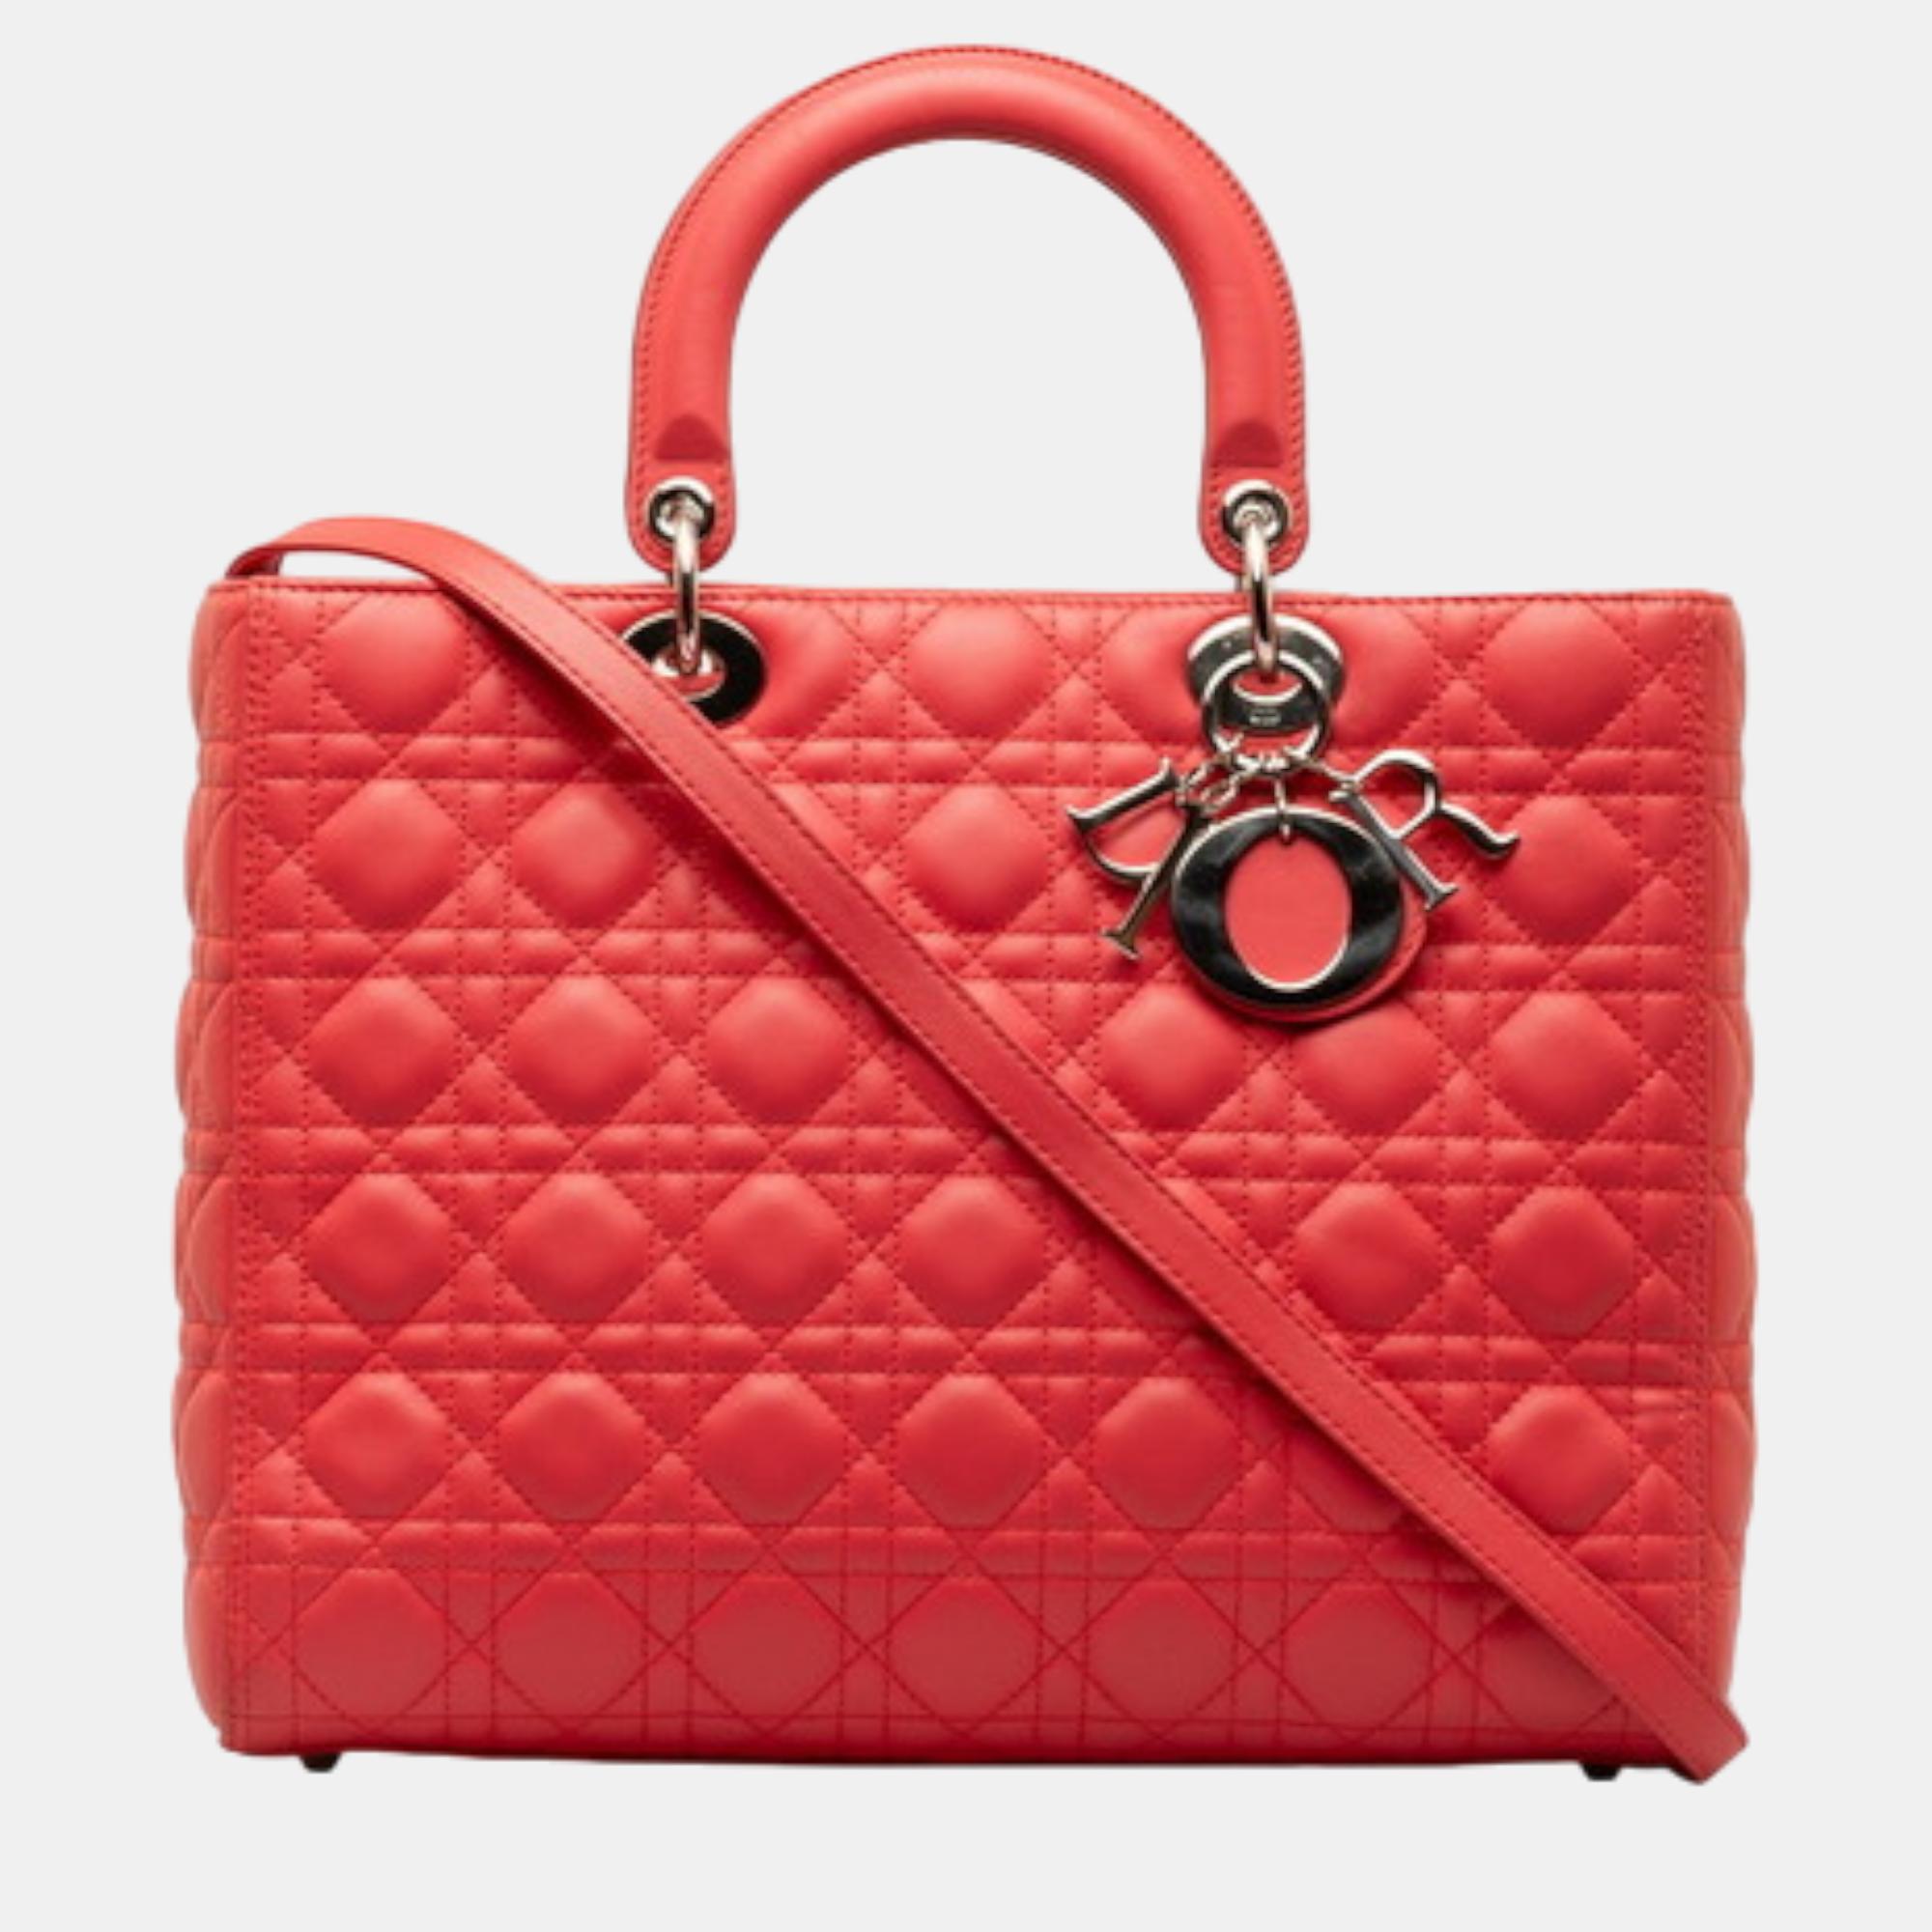 Dior red leather large lady dior top handle bags